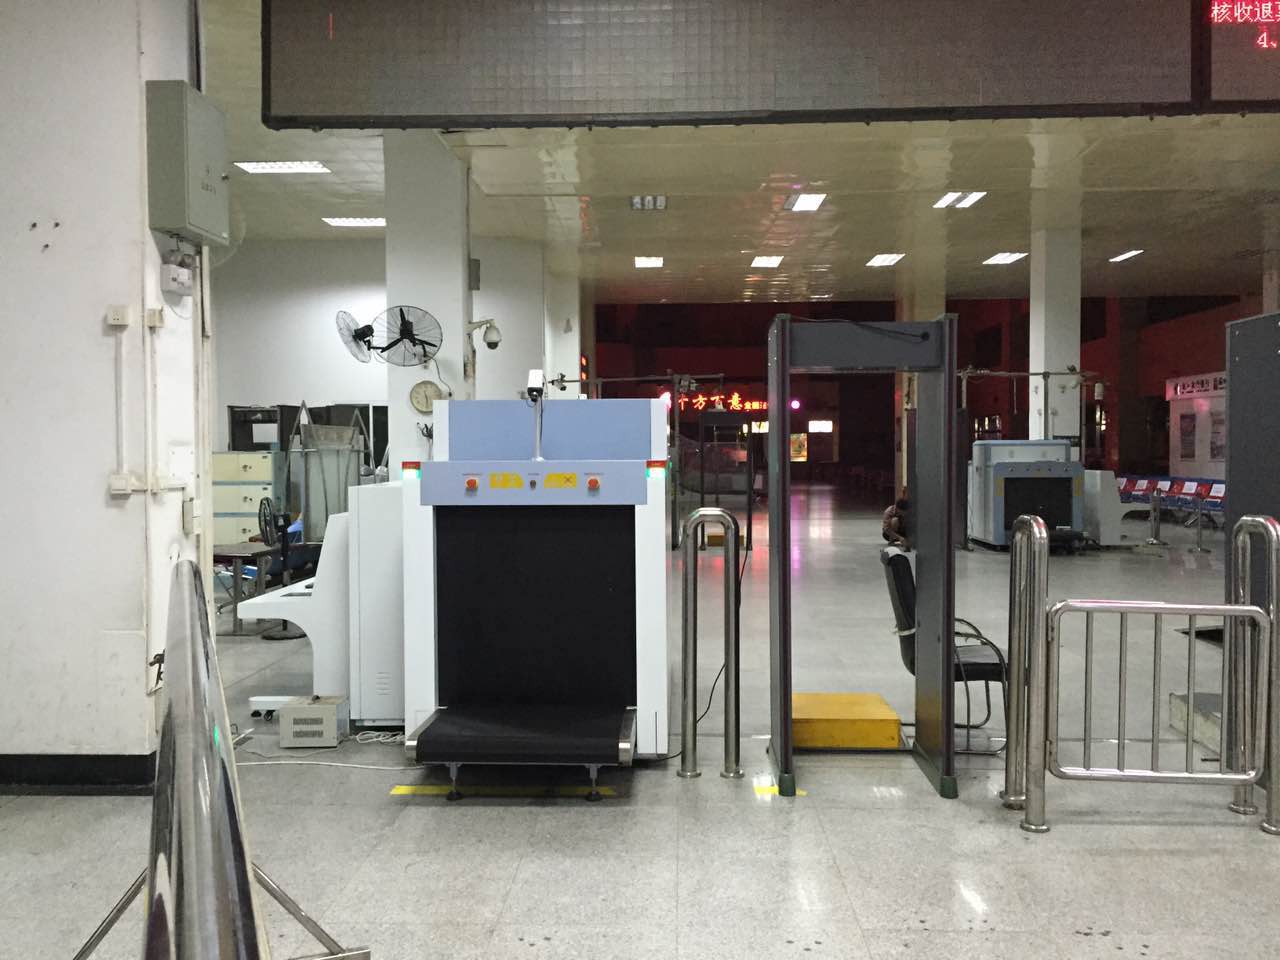 X-Ray Hold Baggage Cargo Screening Security Equipment 